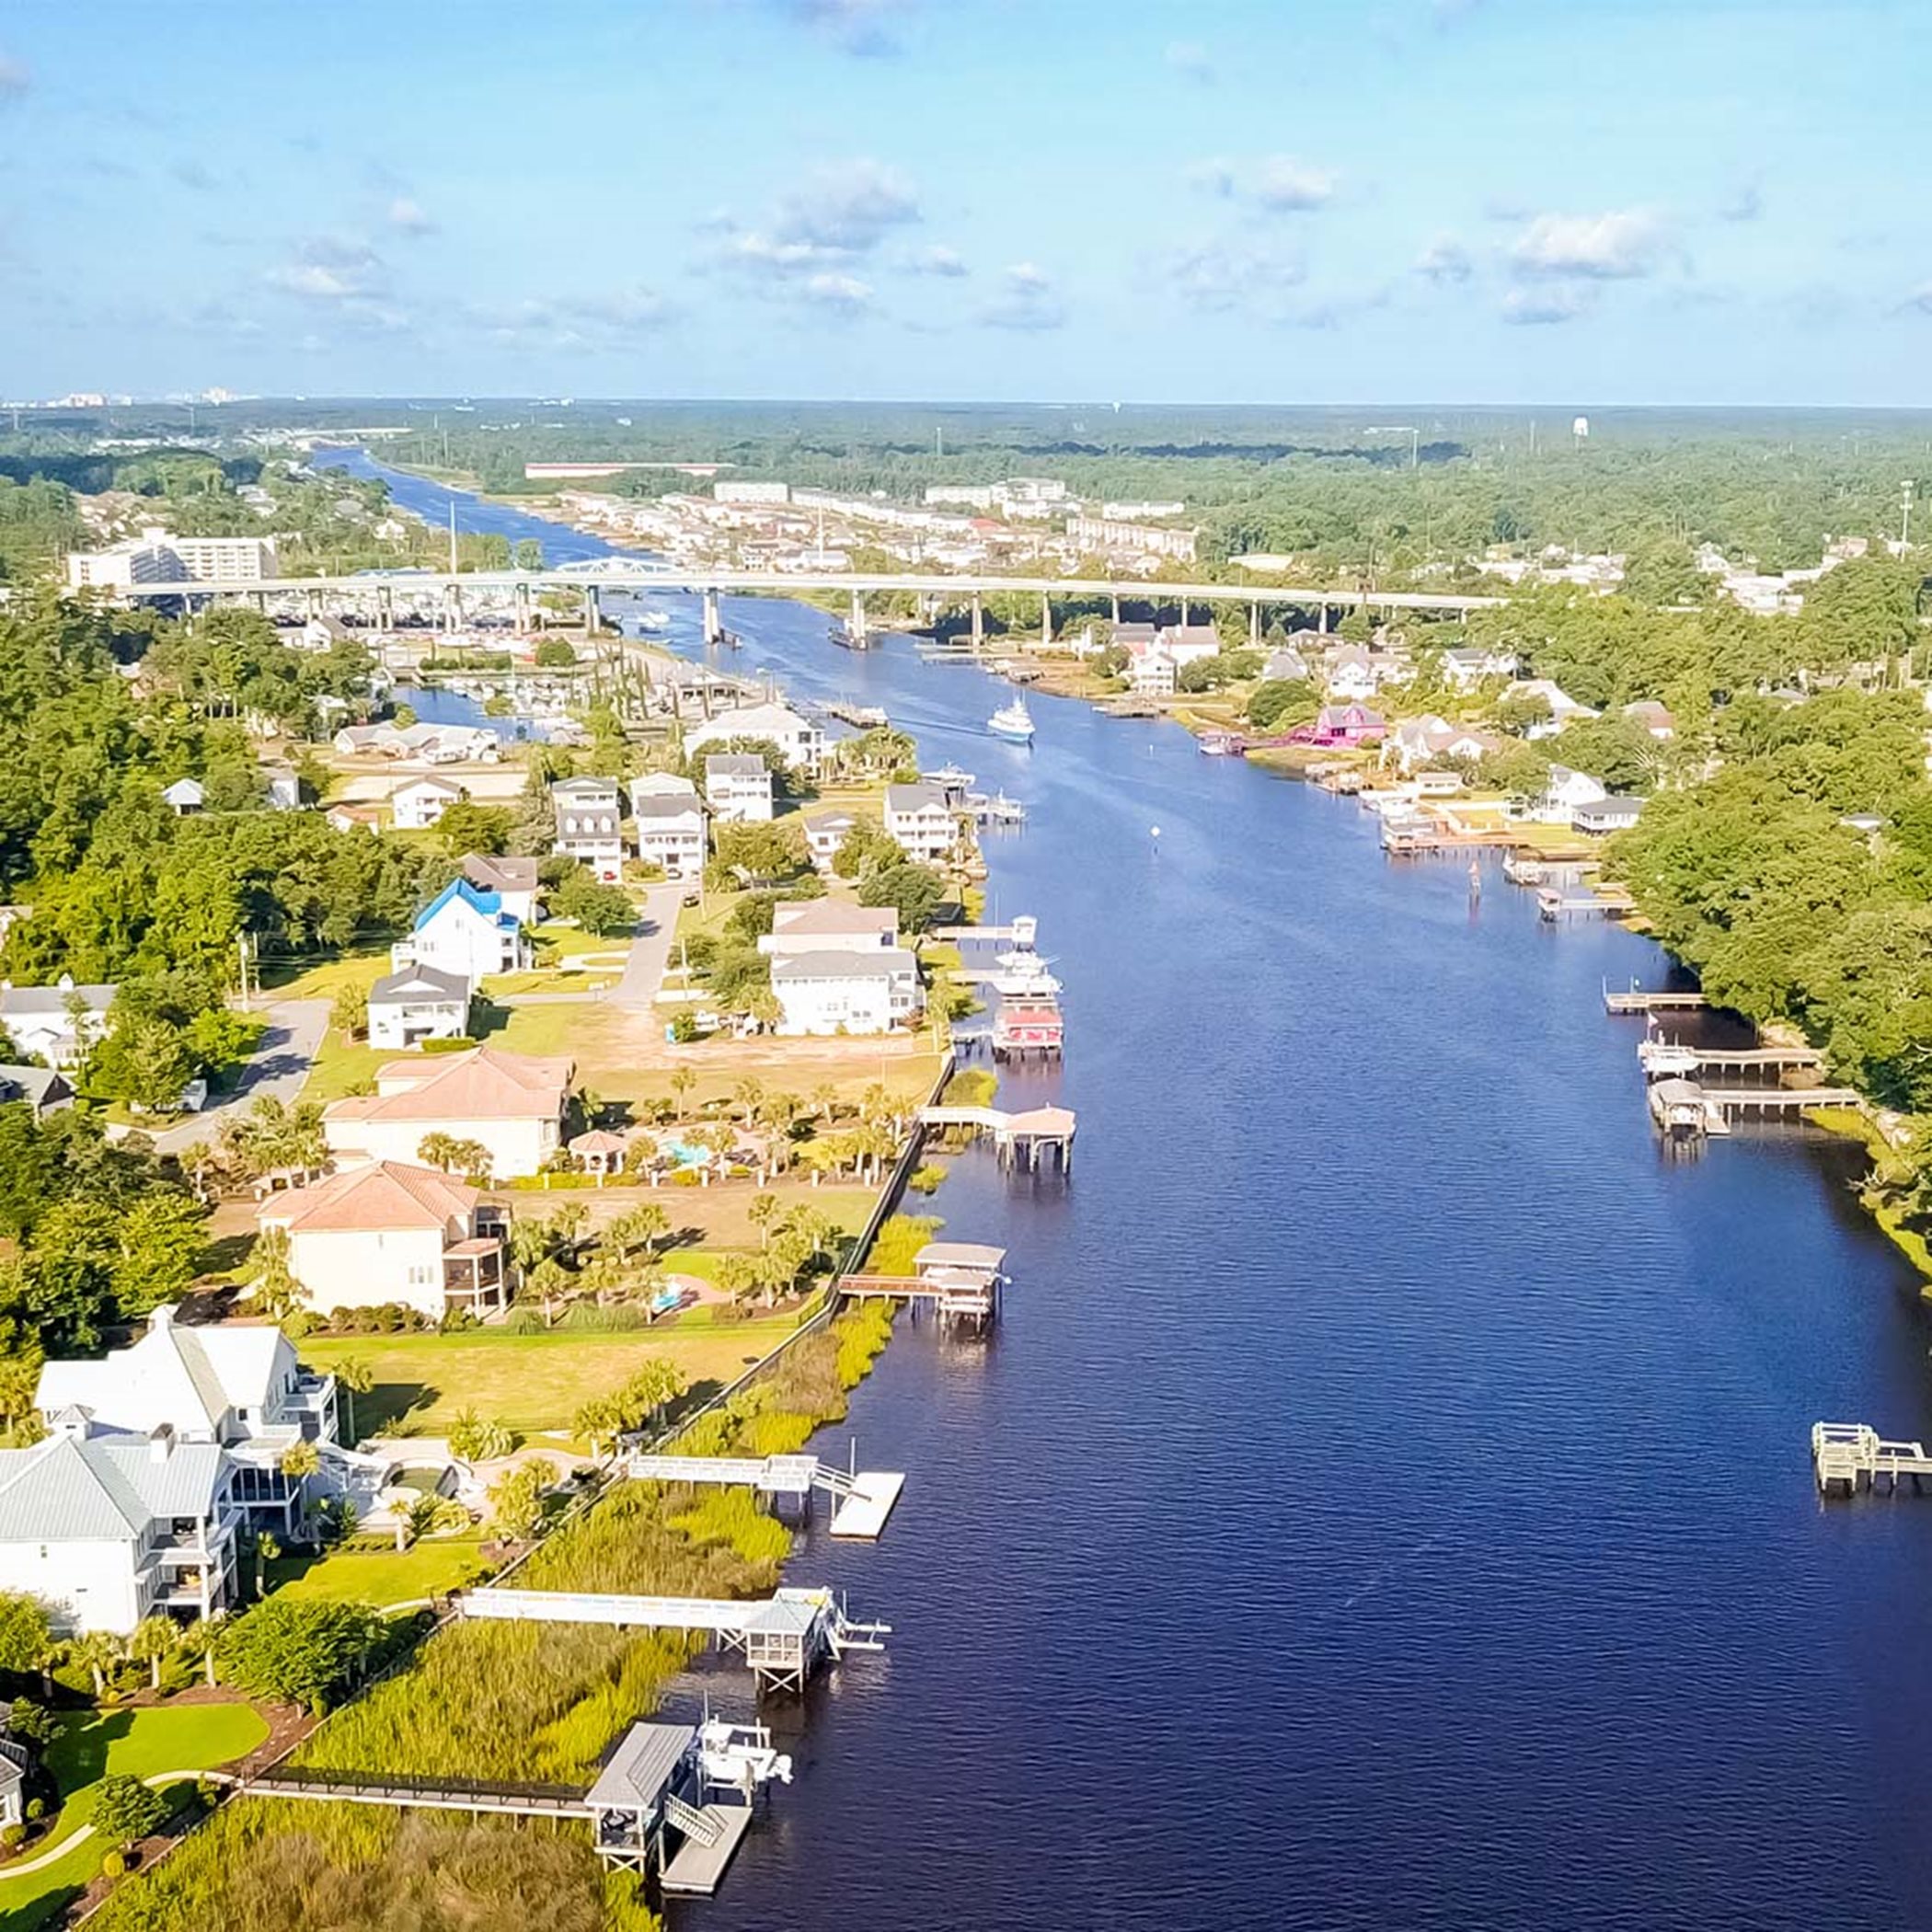 Outdoor adventure awaits on the nearby Intracoastal Waterway